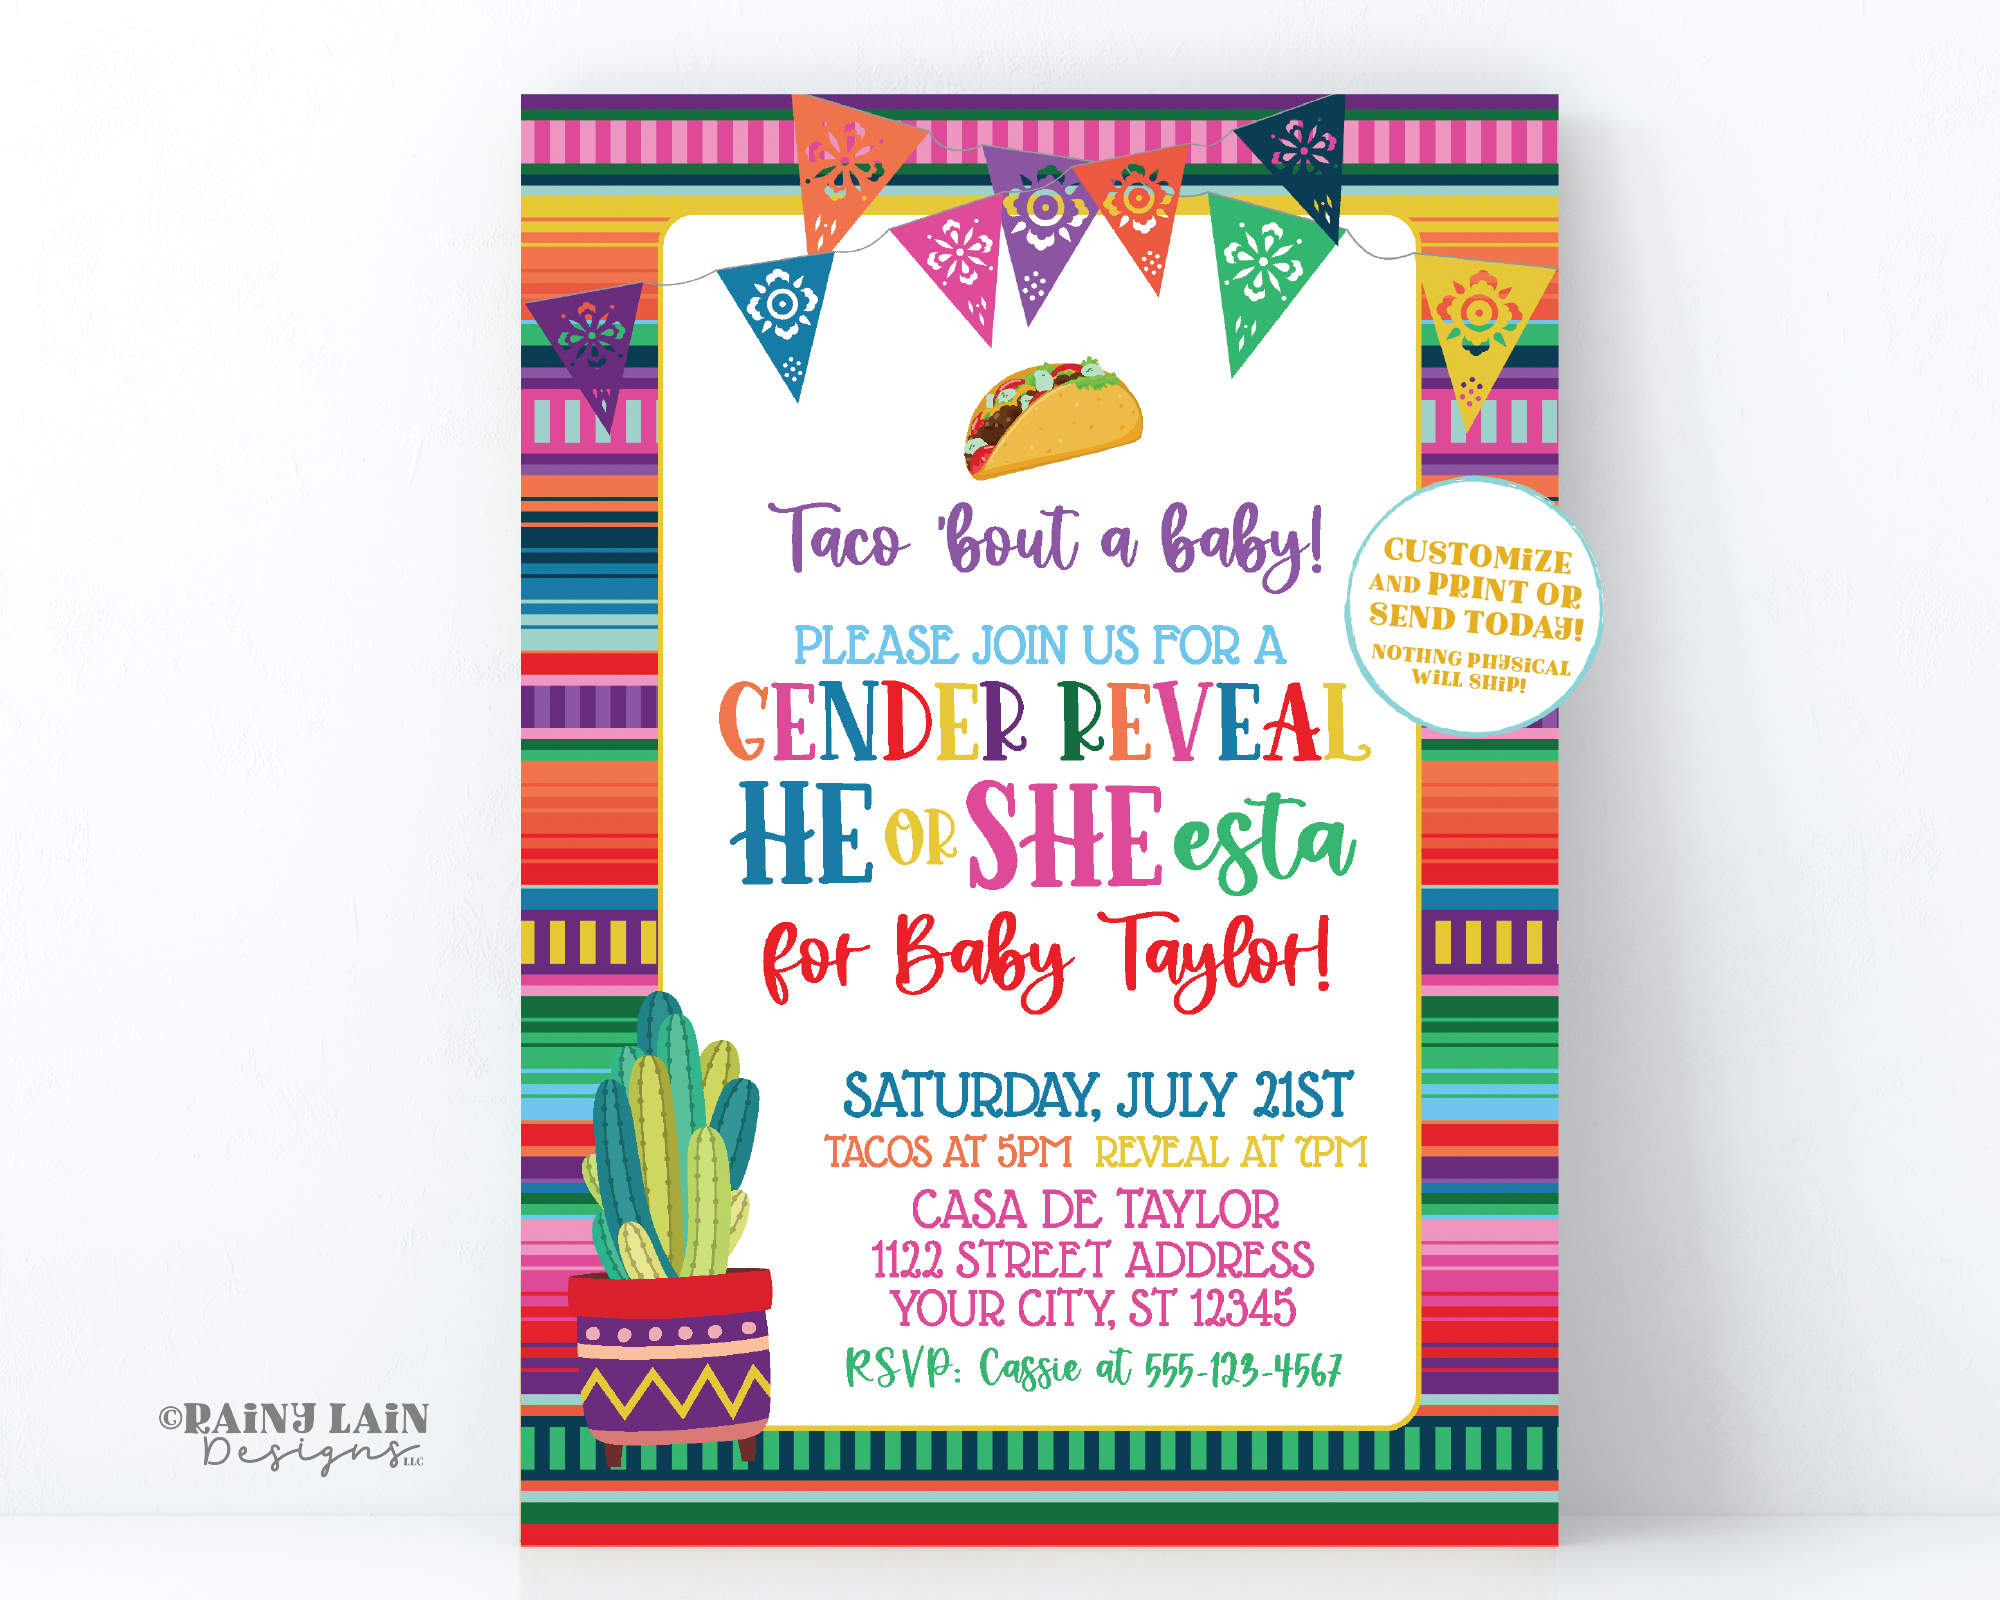 Taco bout a Baby Gender Reveal Invitation, He or She-esta Invite, He or She esta, Fiesta Gender Reveal, Gender Reveal Fiesta, Cactus, Taco